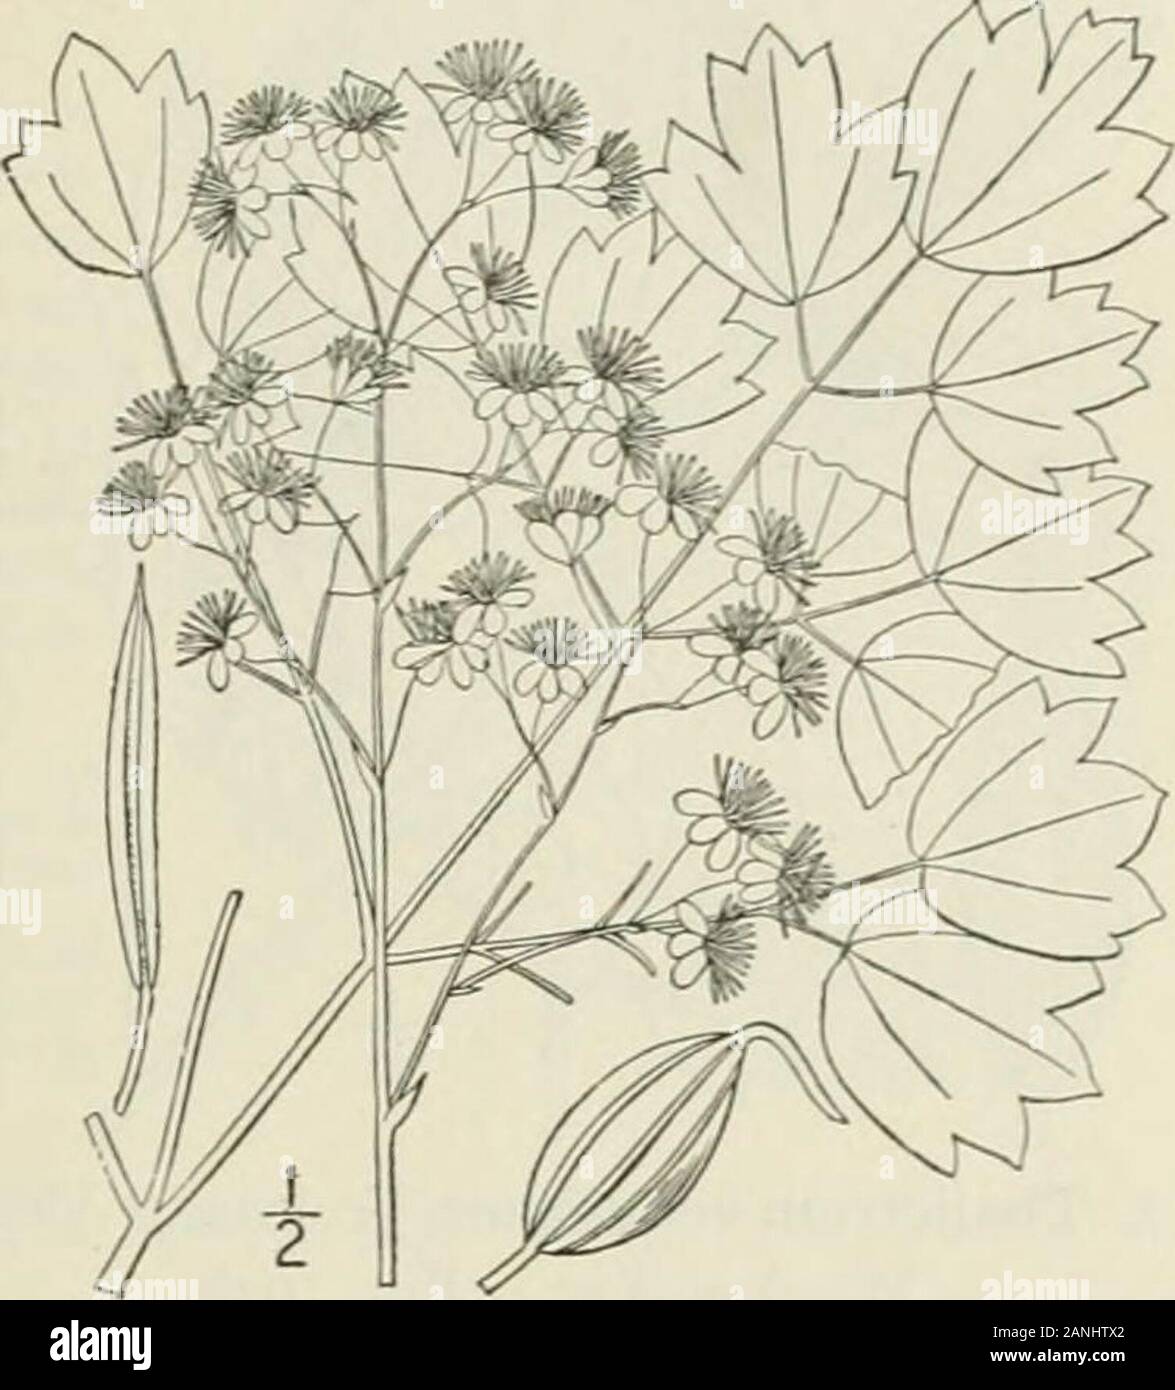 An illustrated flora of the northern United States, Canada and the British possessions : from Newfoundland to the parallel of the southern boundary of Virginia and from the Atlantic Ocean westward to the 102nd meridian; 2nd ed. . 5. Thalictrum revolutum DC. axyMeadow-Rue. Fig. 1936. Thalictrum revolutum DC. Syst. i: 173. 1818.T. purpurascens var. ceriferum Austin : A. Gray. Man.Ed. 5, 39. 1867. .Stem mostly stout, often purplish, t,°-7° high,.glabrous or nearly so. Leaves 3-4-ternatc, the lowerpetiolcd, the upper sessile or short pctioled; leafletsfirm in texture, ovate to obovate. 1-3-lobcd Stock Photo